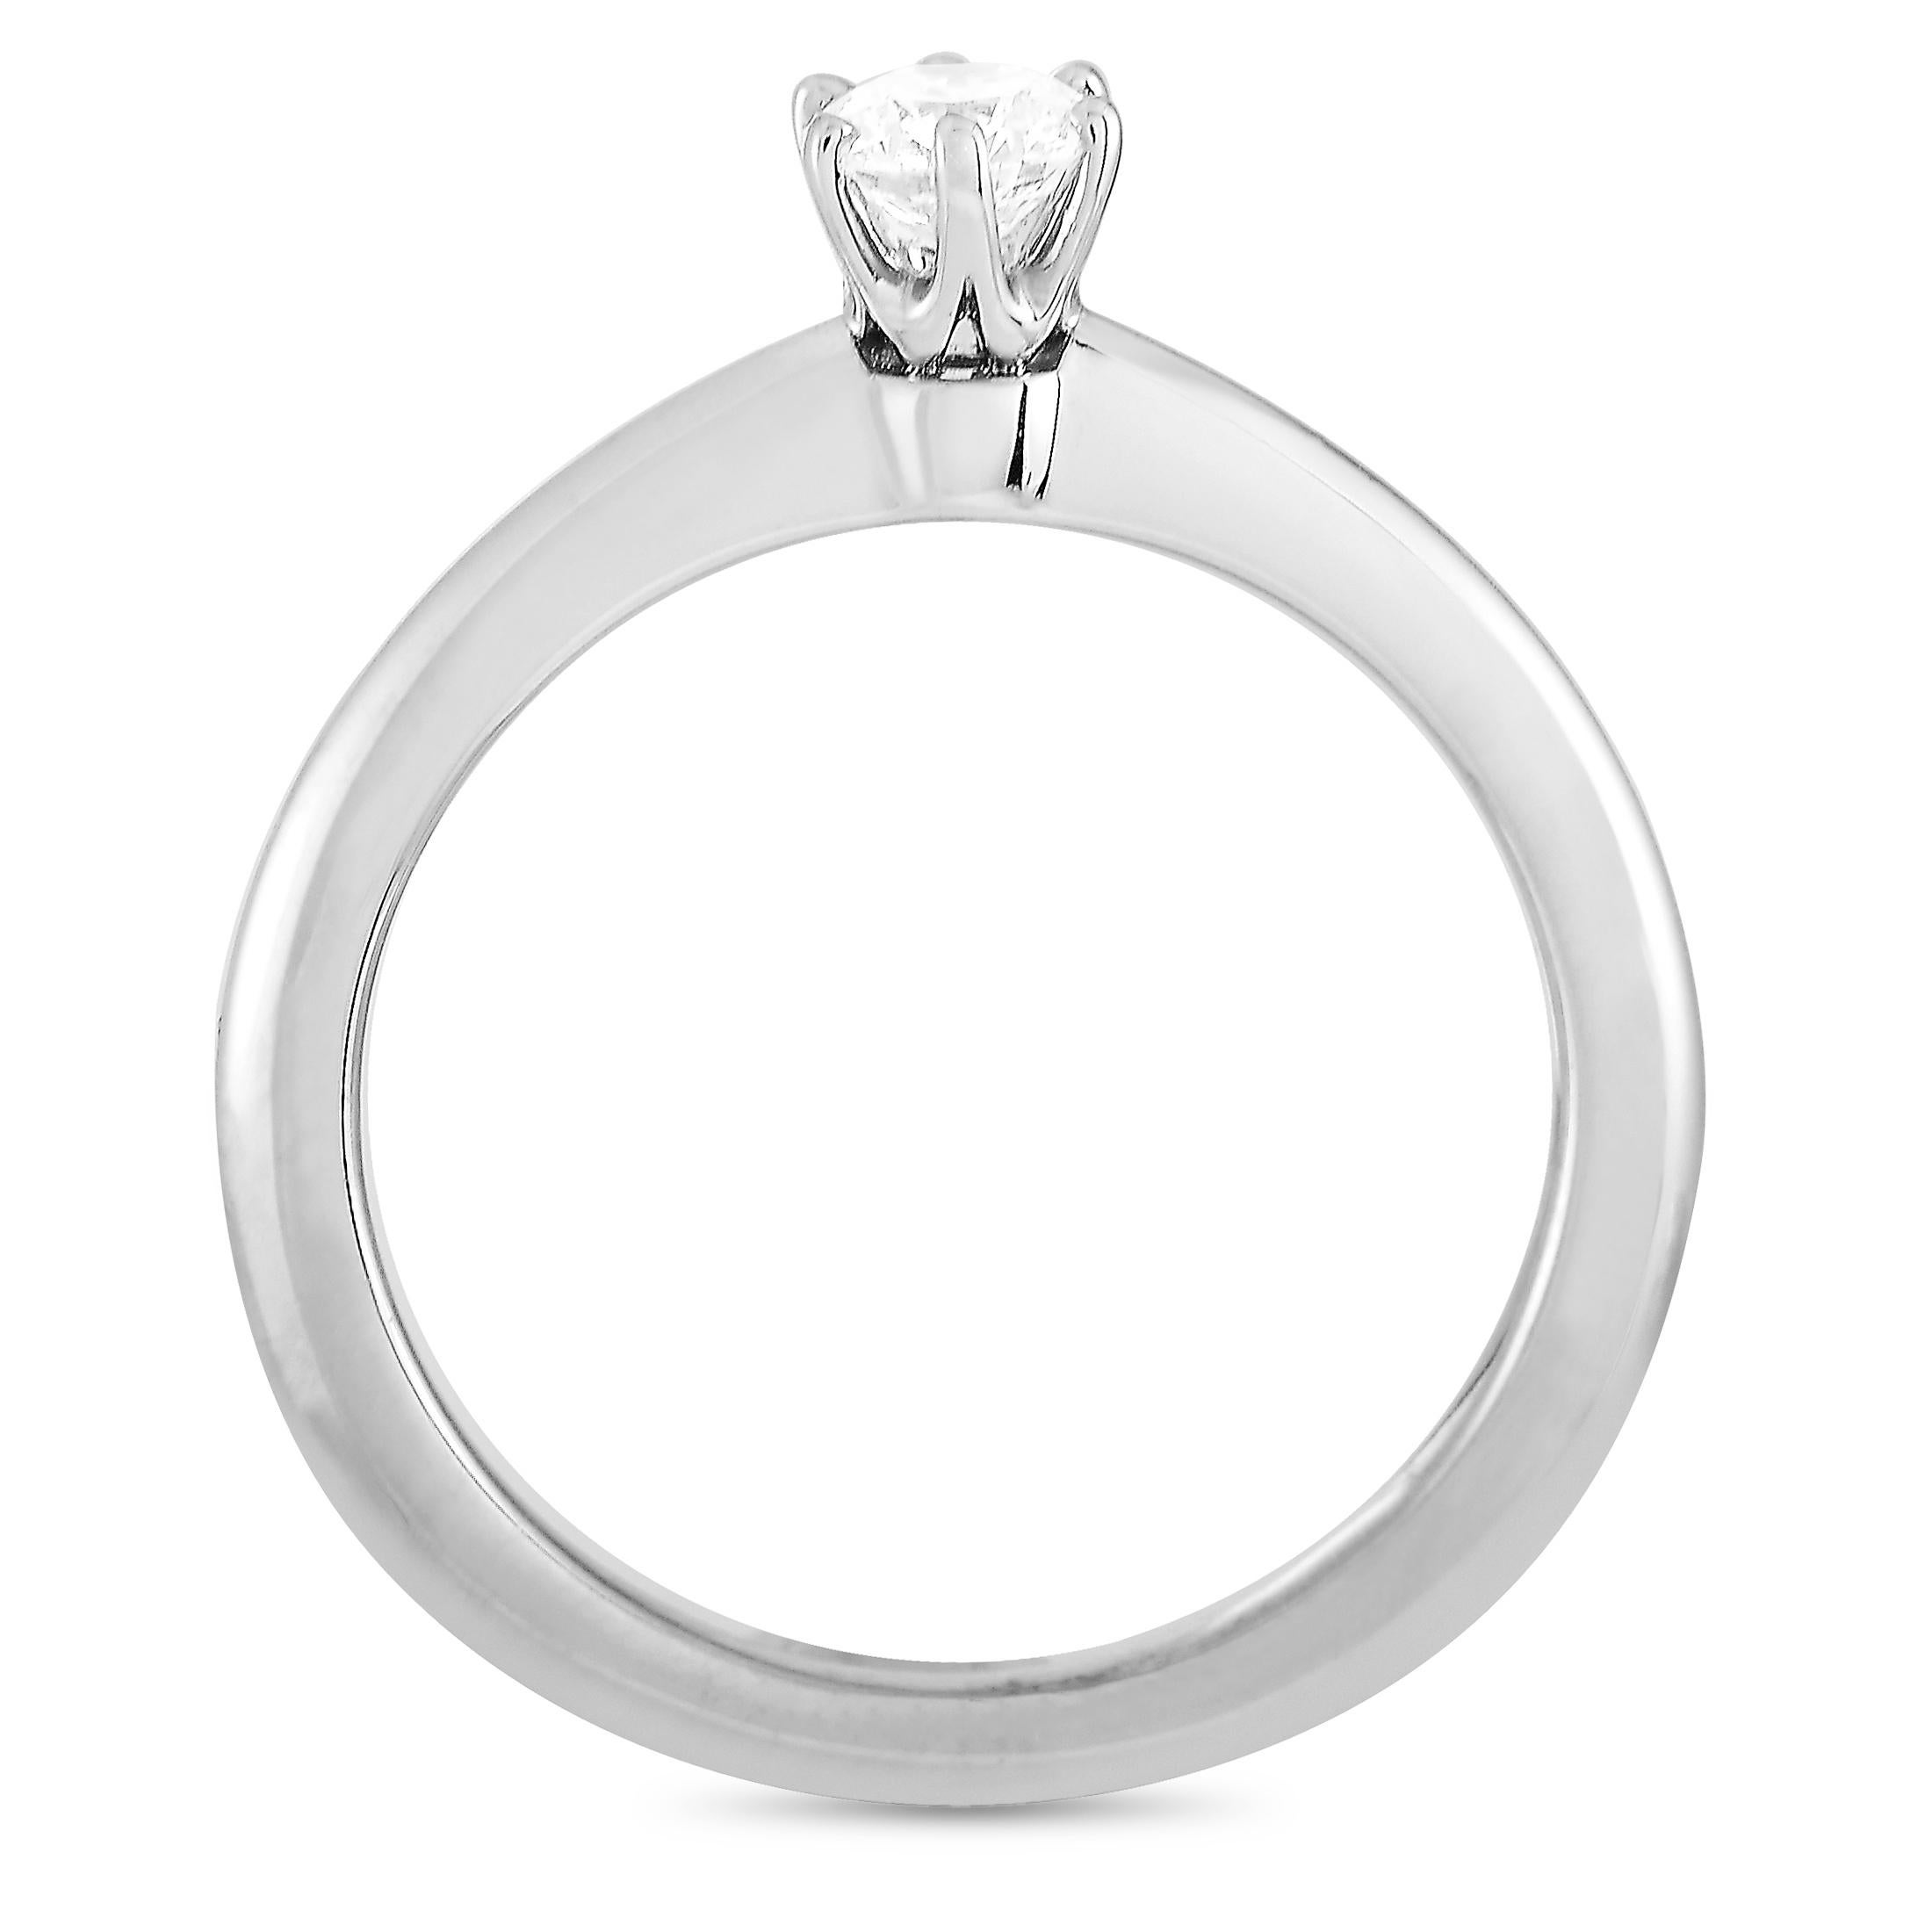 This Tiffany & Co. engagement ring is crafted from platinum and set with a 0.26 ct diamond stone that features E color and VVS2 clarity. The ring weighs 4 grams and boasts band thickness of 2 mm and top height of 6 mm, while top dimensions measure 5